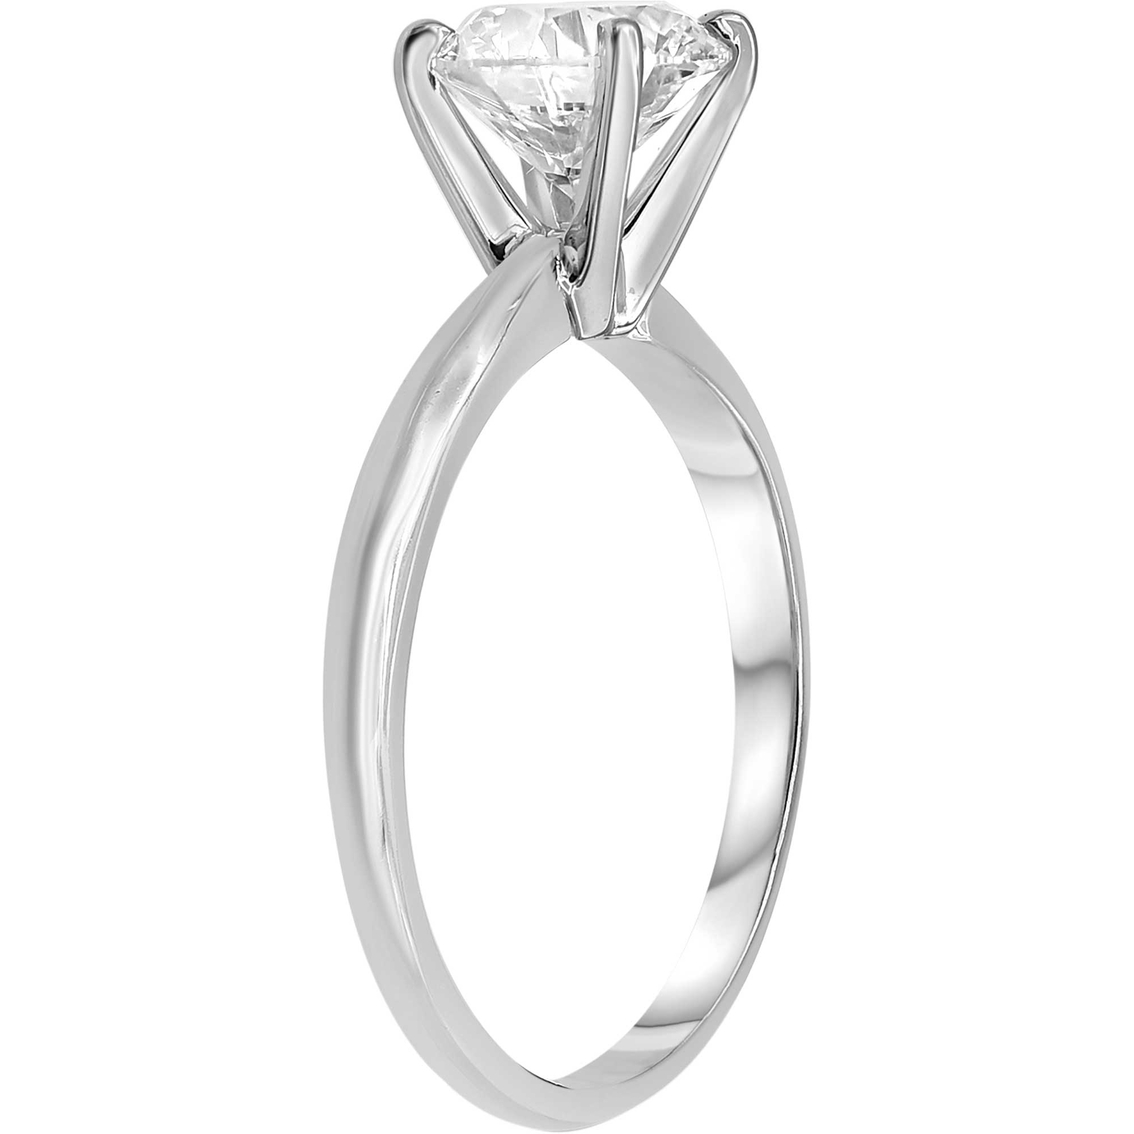 14K White Gold 1 CTW Diamond Solitaire Ring - Image 4 of 5